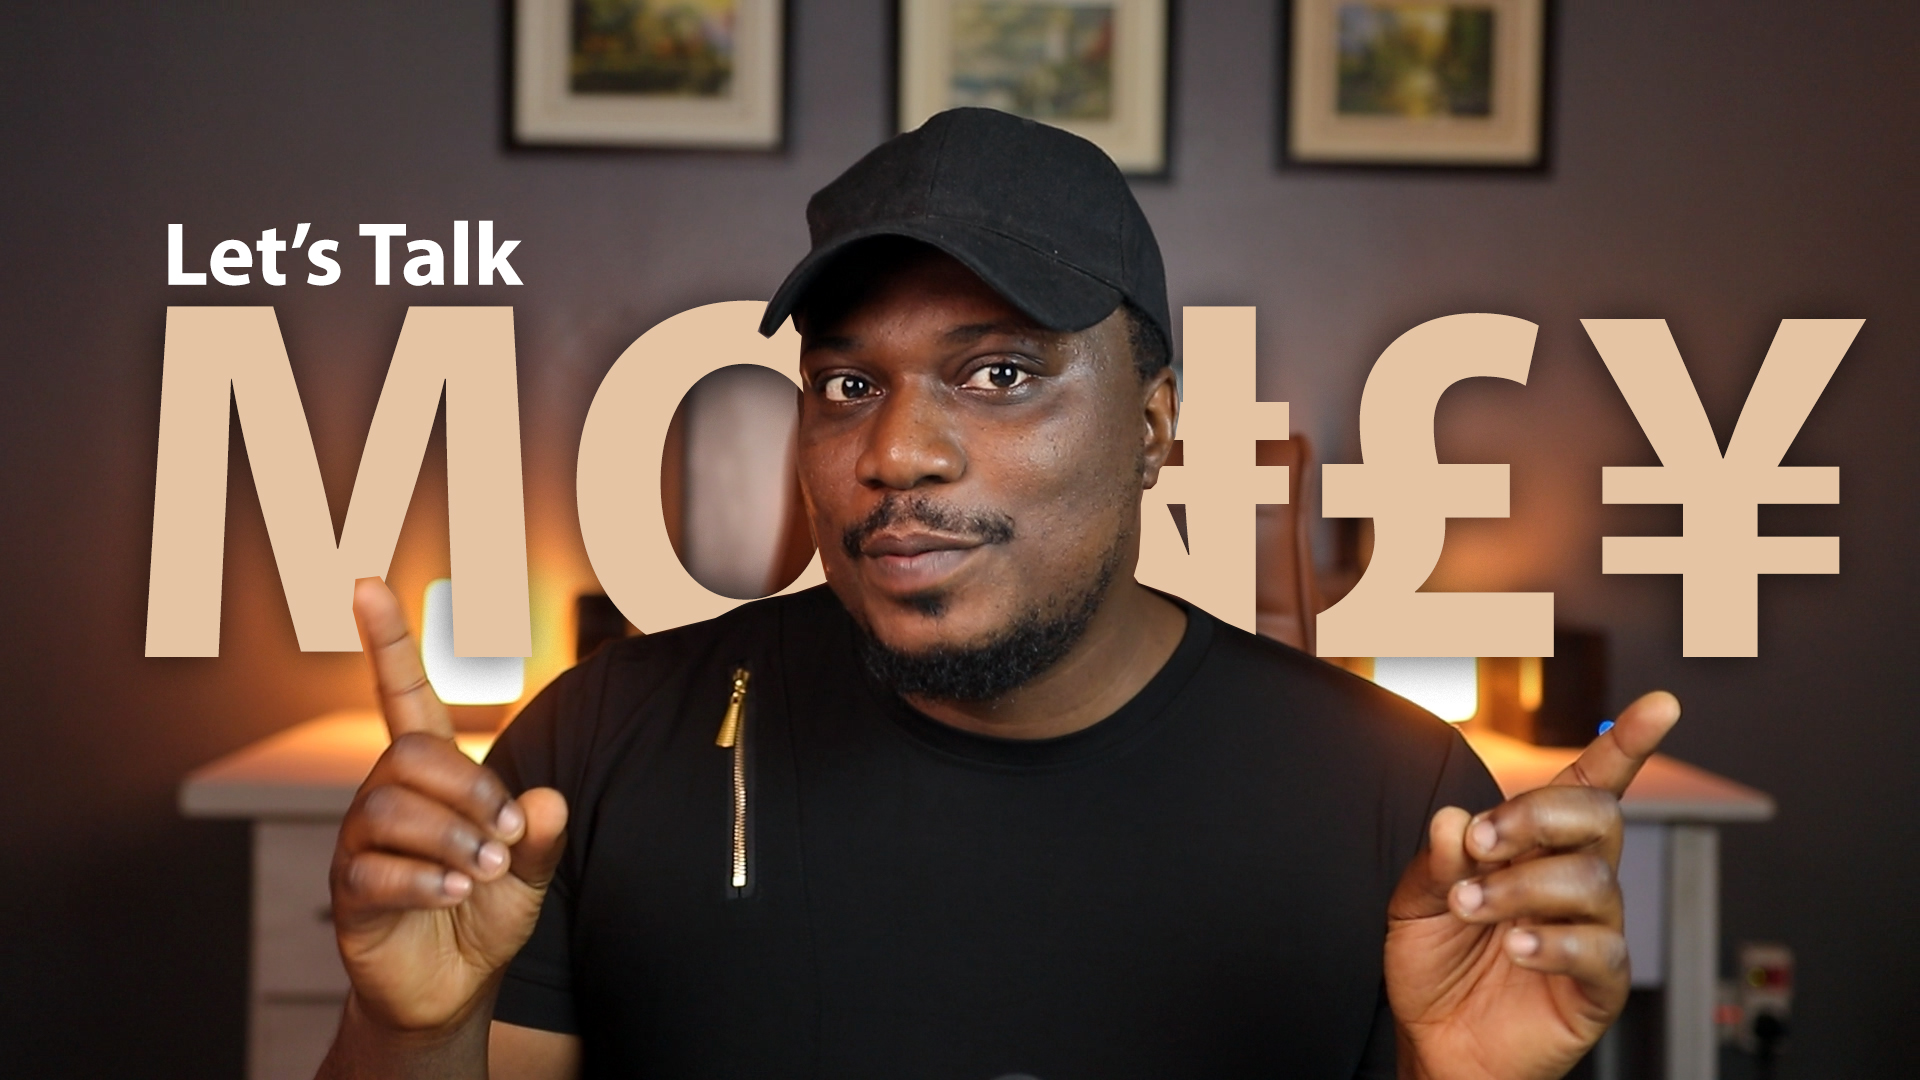 Let’s talk money – How I maintain financial safety as a Youtuber